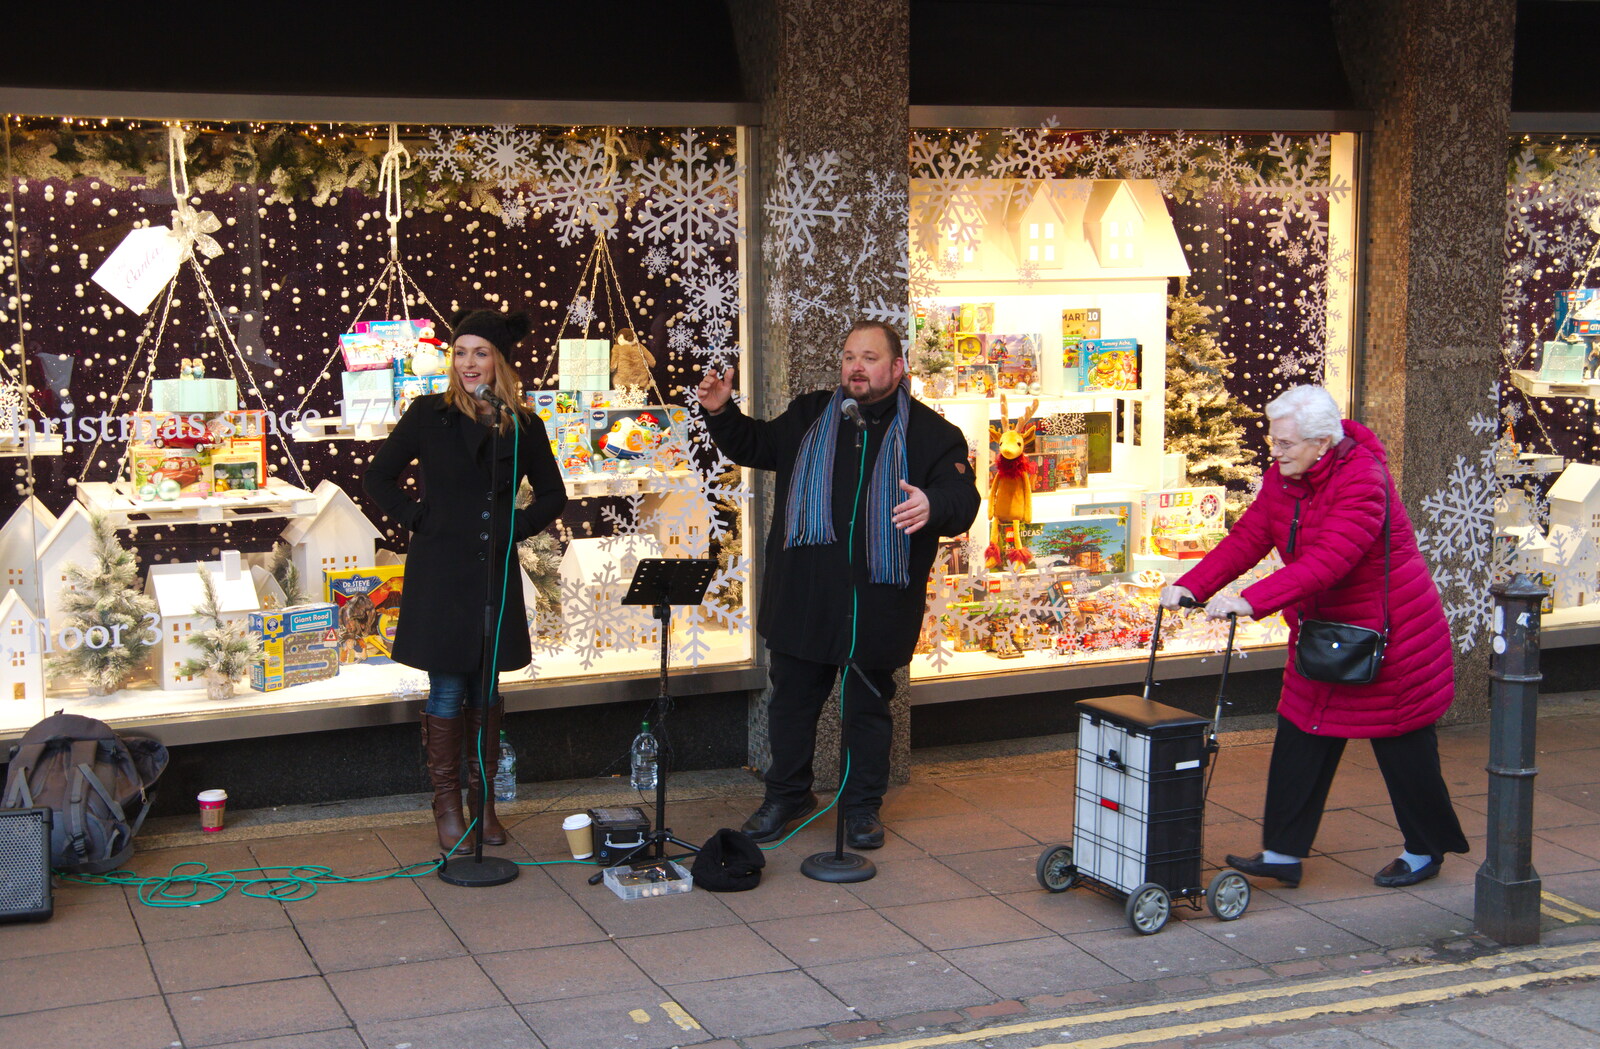 Some opera singers do some busking from A Spot of Christmas Shopping, Norwich, Norfolk - 23rd December 2019